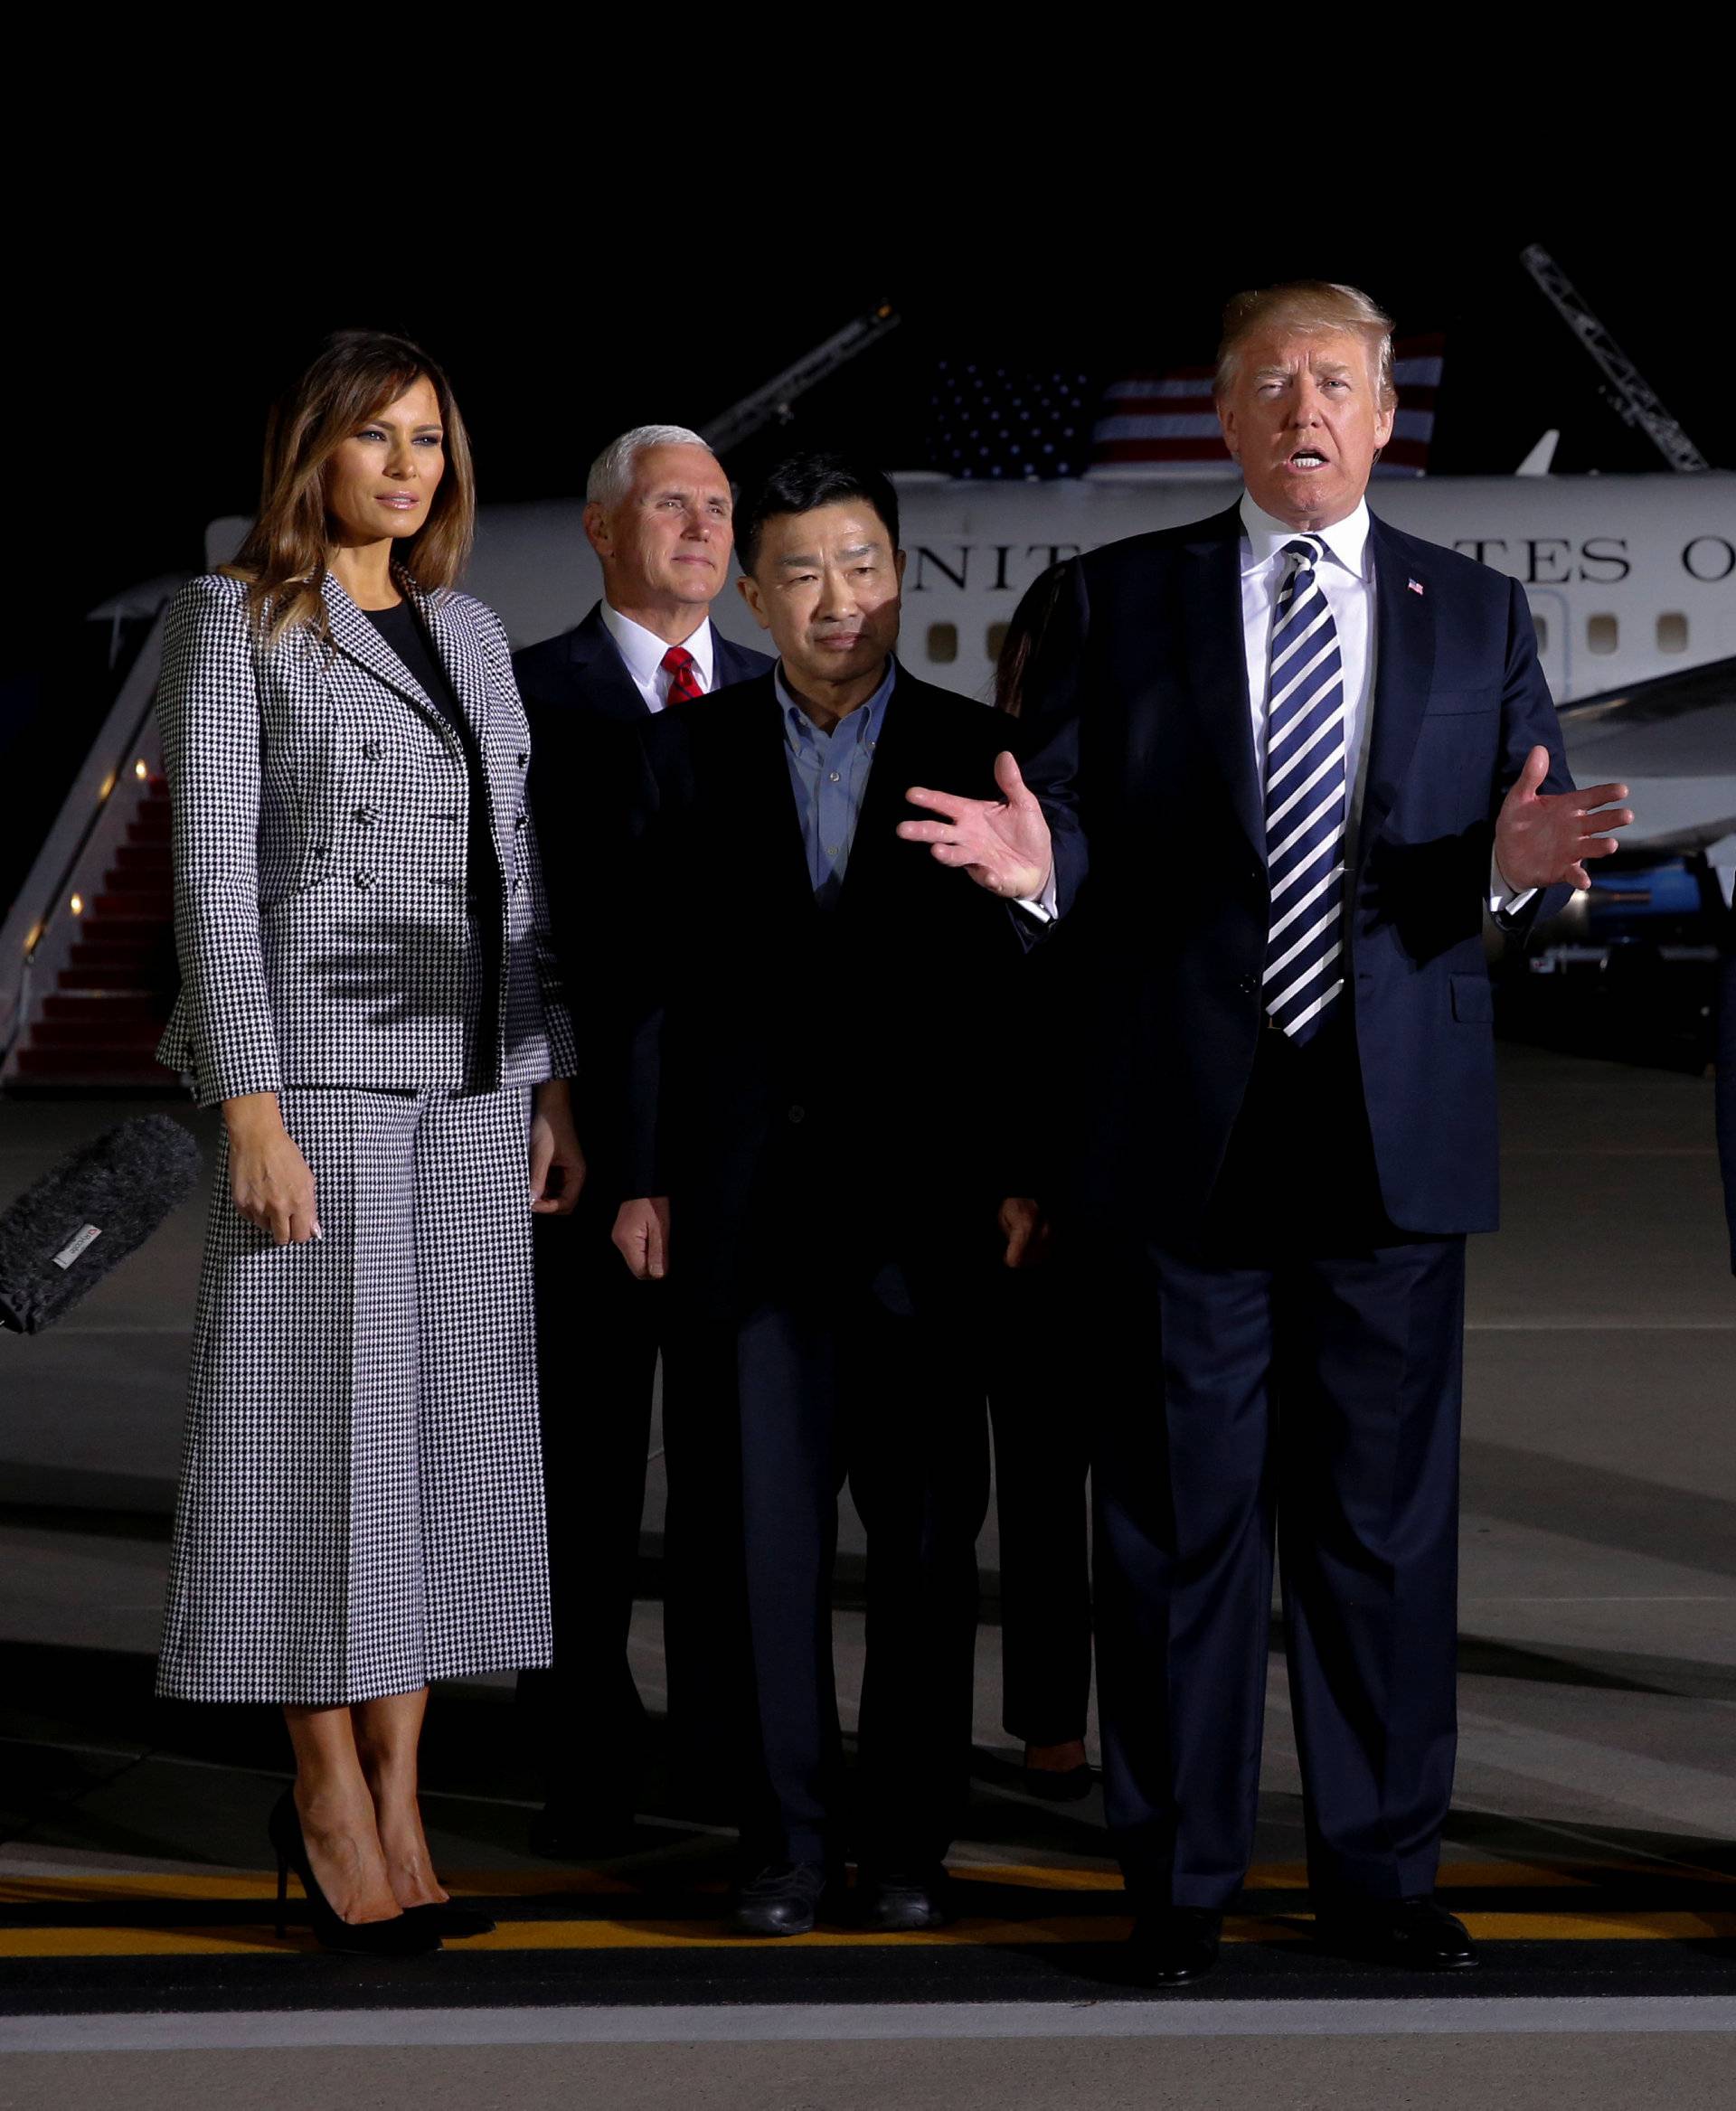 U.S.President Donald Trump speaks to the media as he meets the Americans released from detention in North Korea, Tony Kim, Kim Hak-song and Kim Dong-chul, upon their arrival at Joint Base Andrews